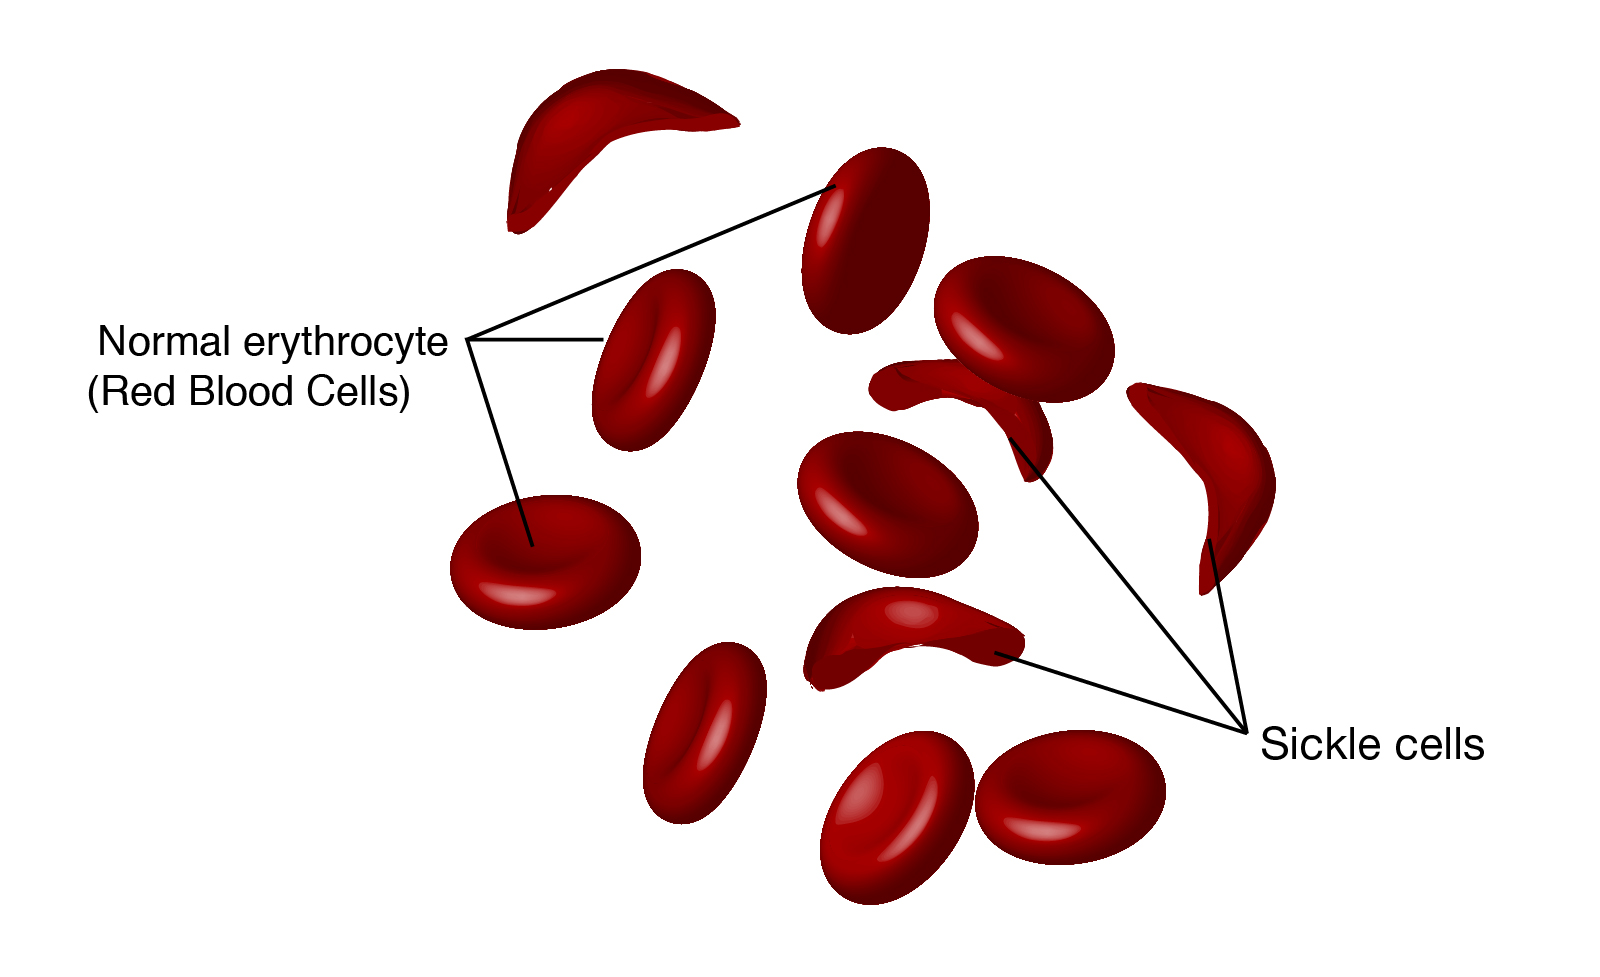 case study sickle cell disease